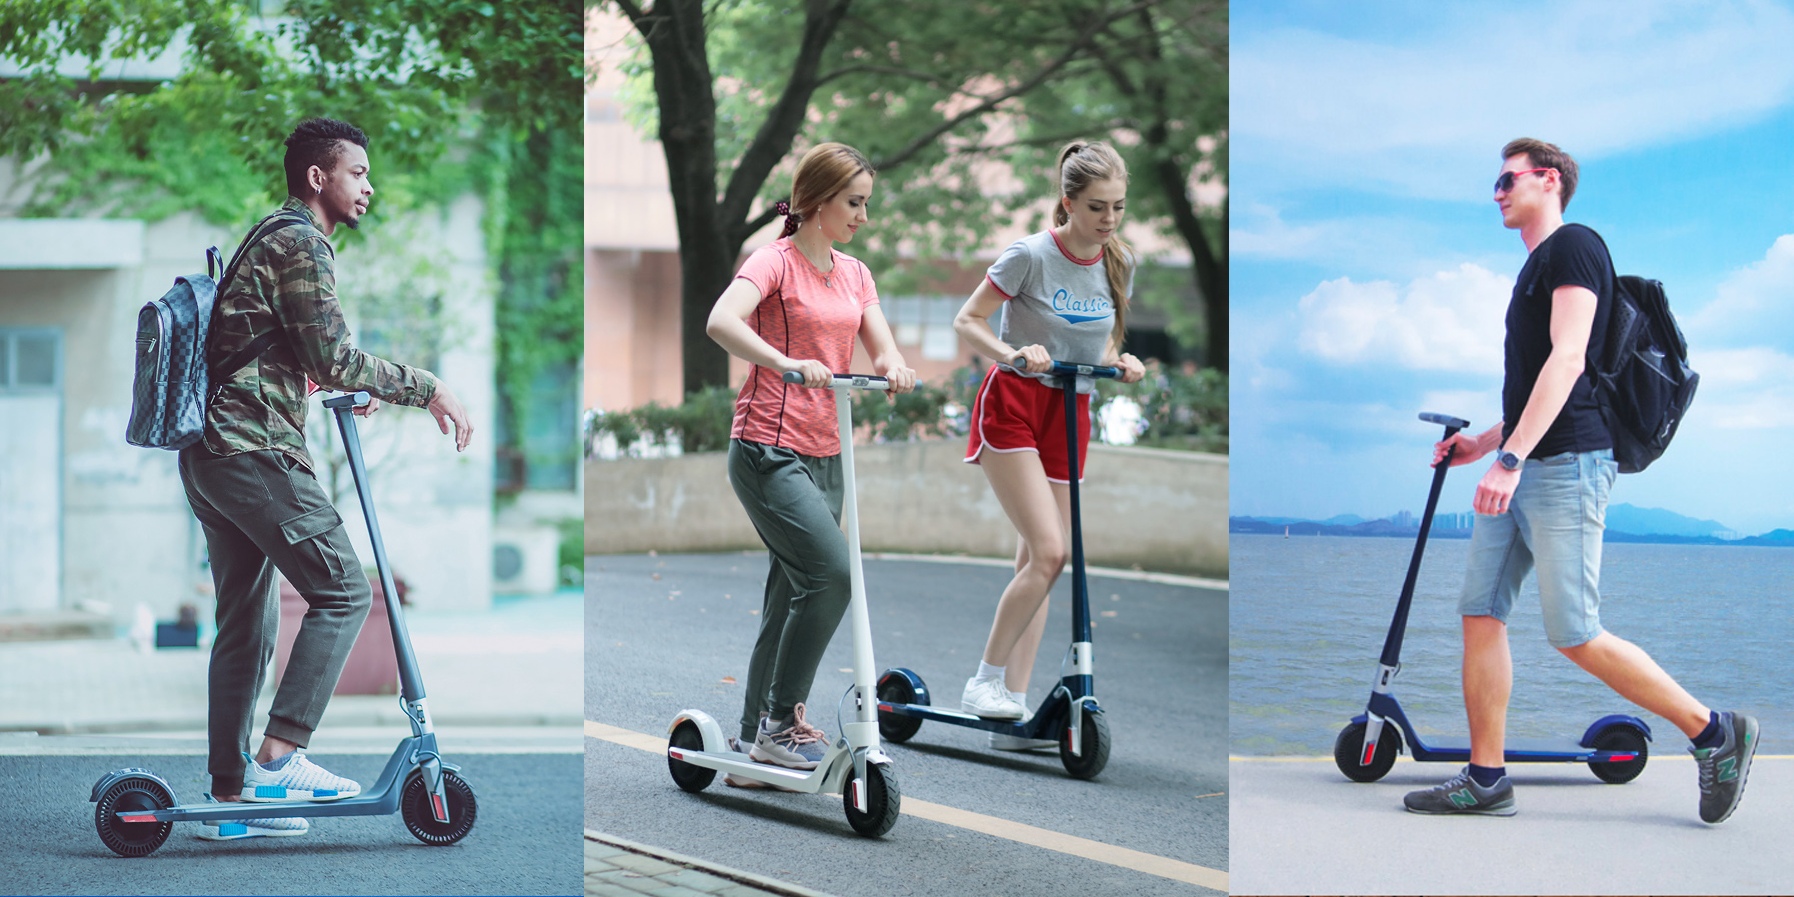 The new SWAN electric scooter uses dual hub motors and makes flat tires  impossible | Electrek